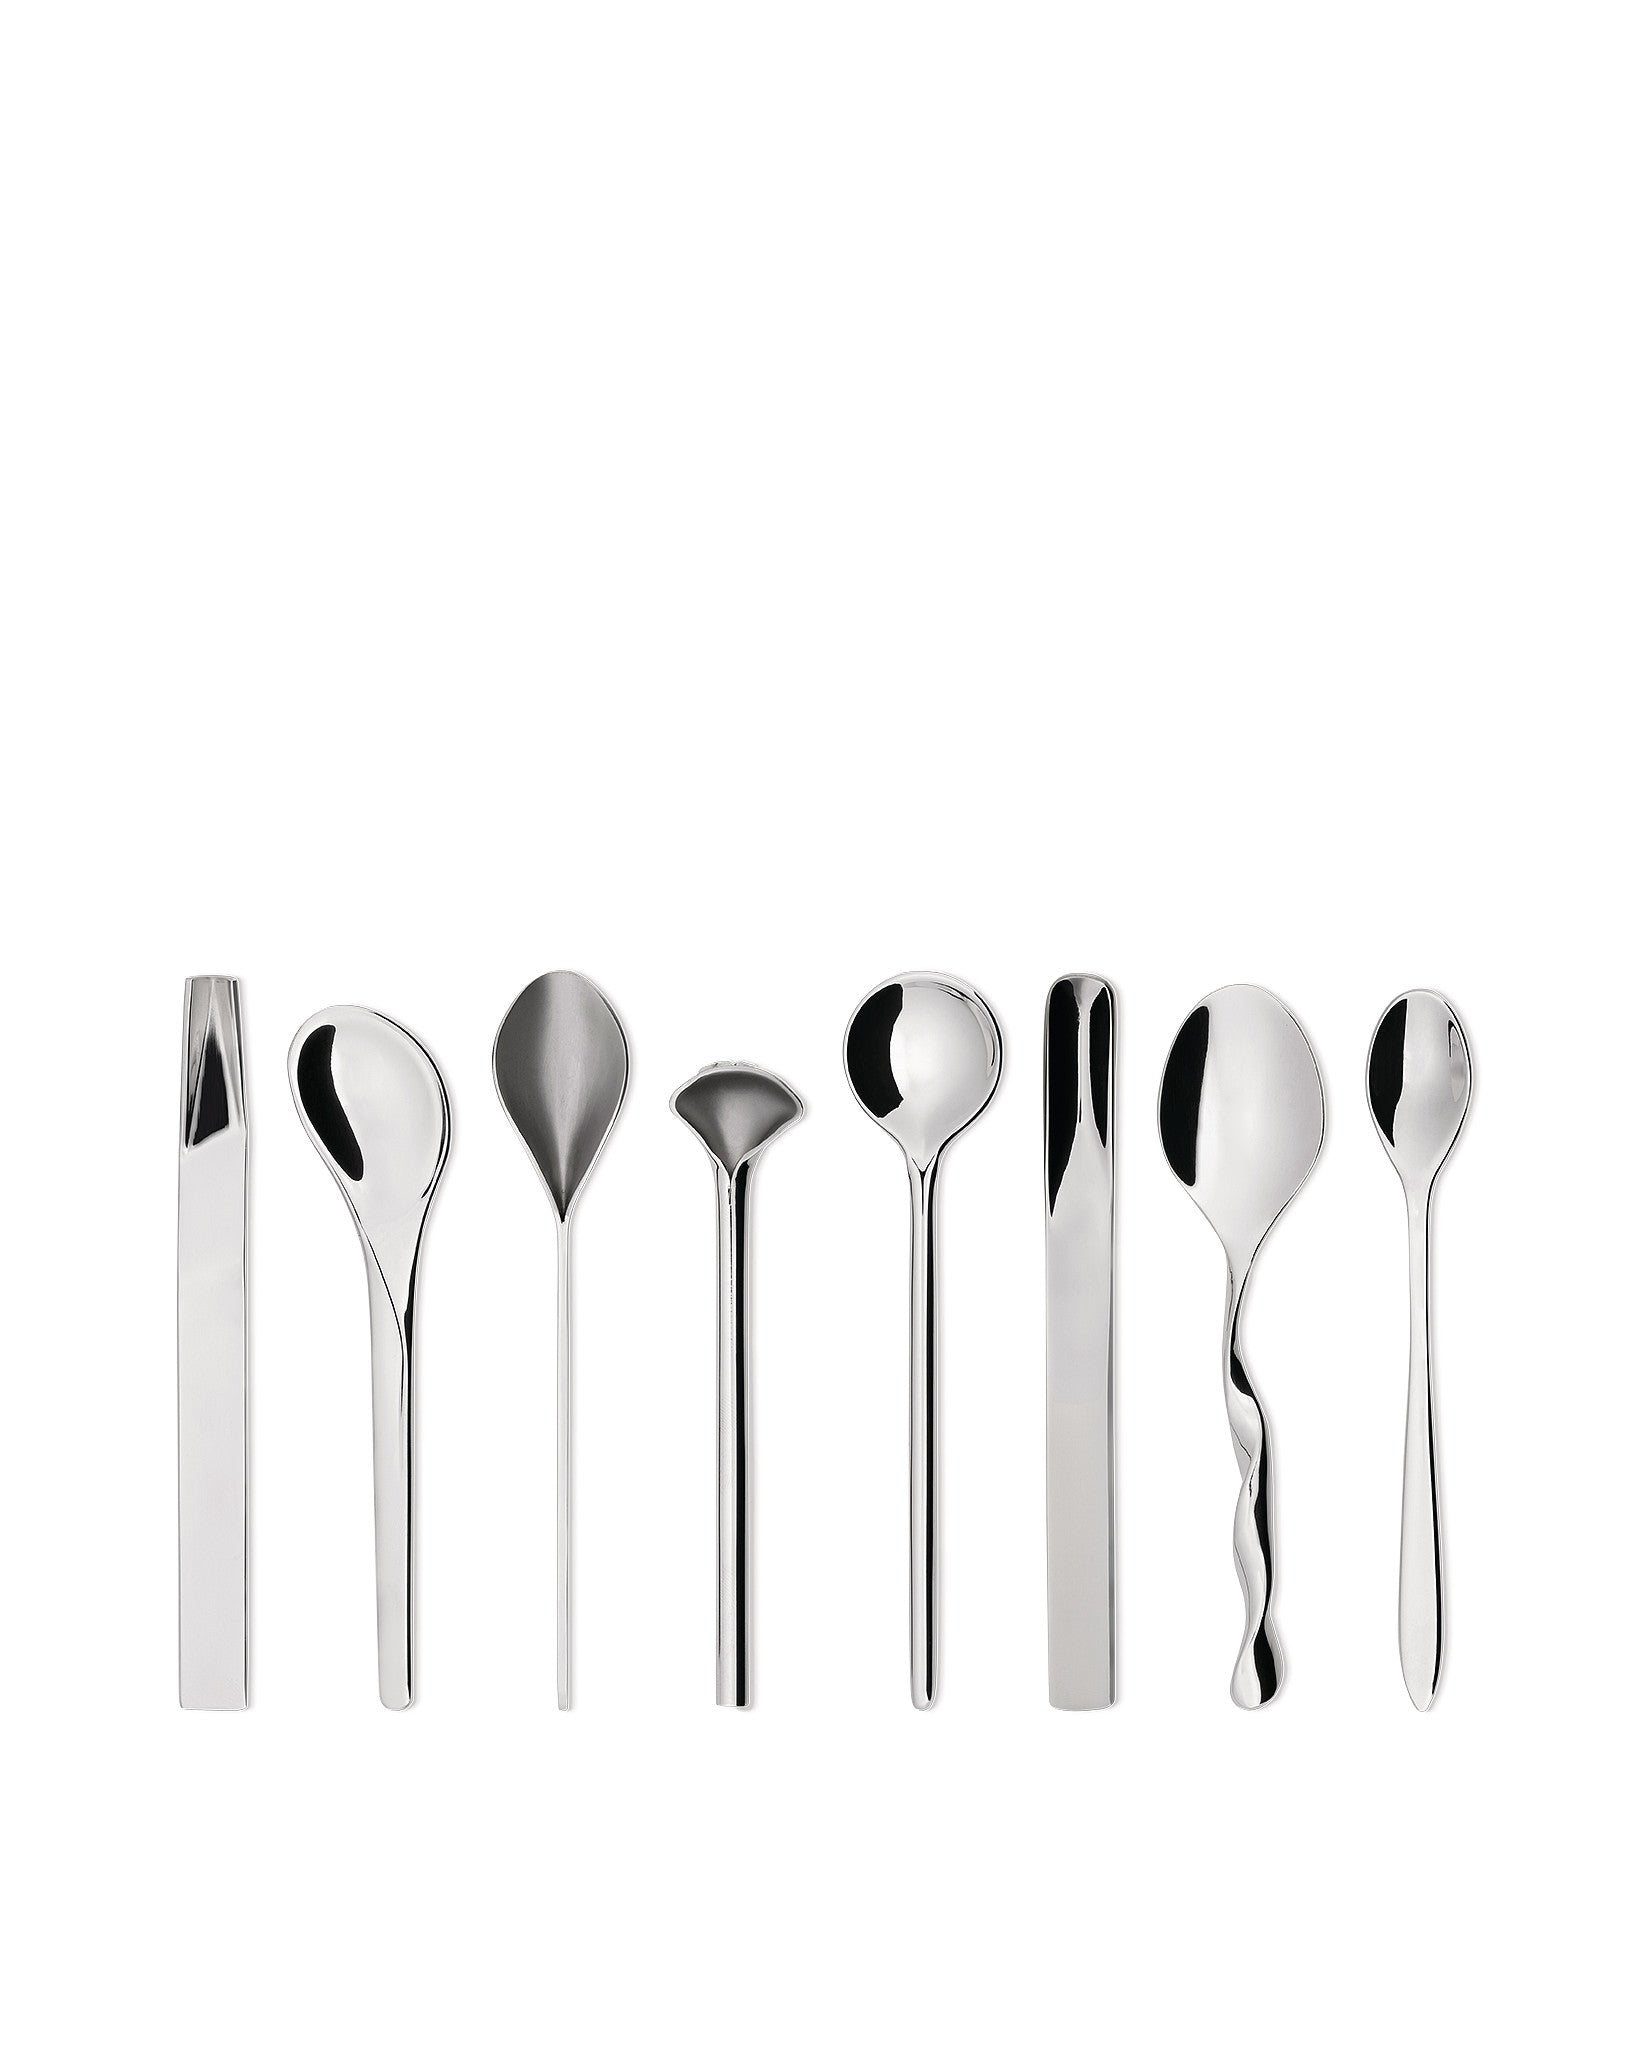 Breakfast Accessories & Gifts  Alessi (US) – Alessi USA Inc